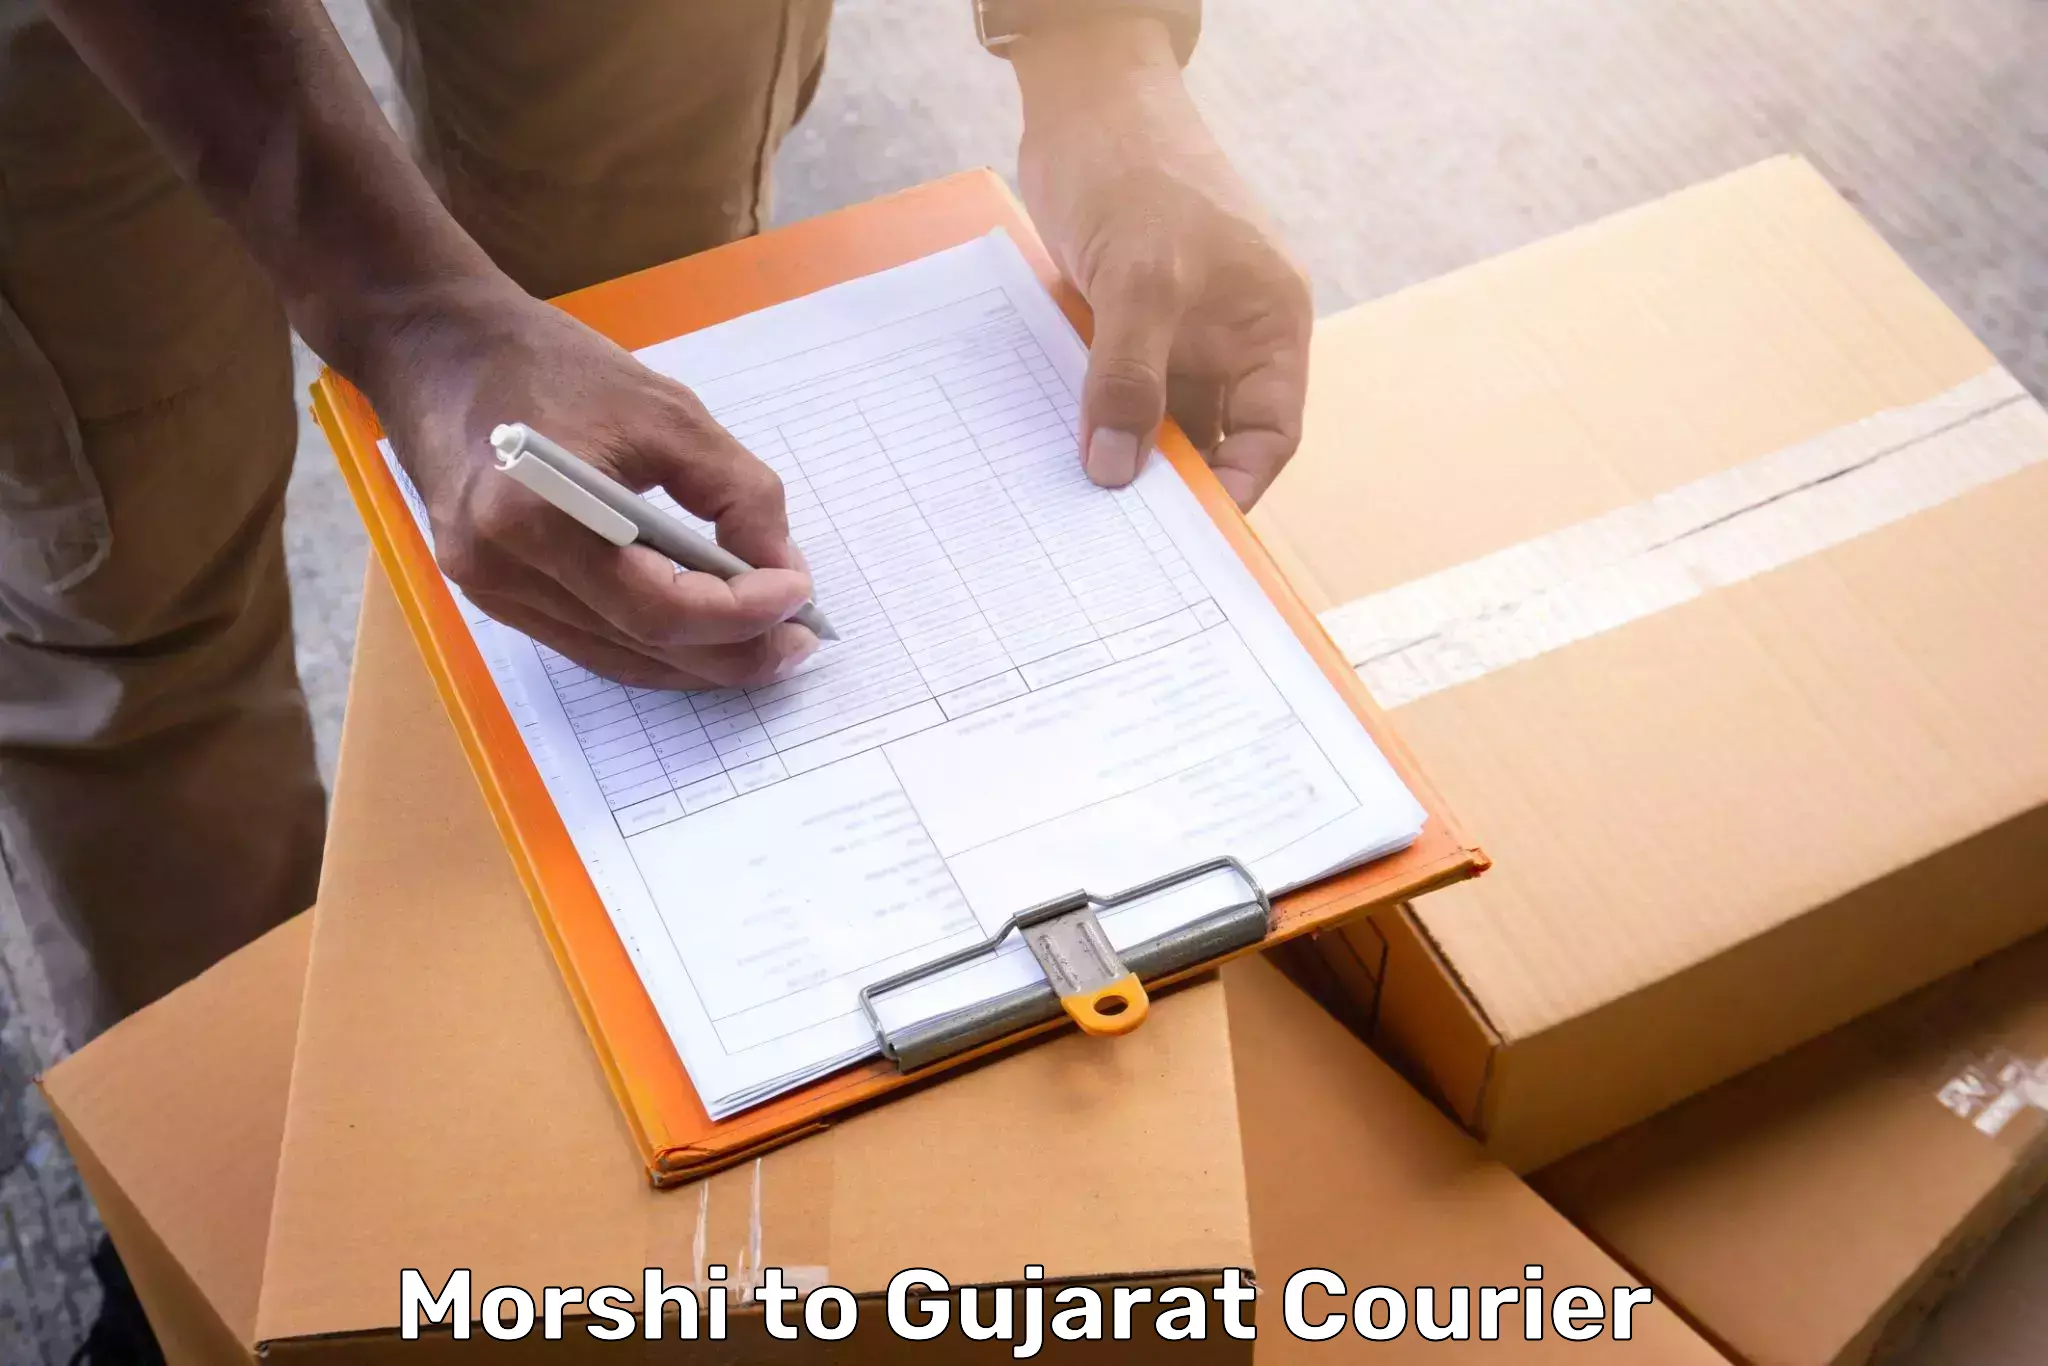 Instant baggage transport quote Morshi to Gujarat